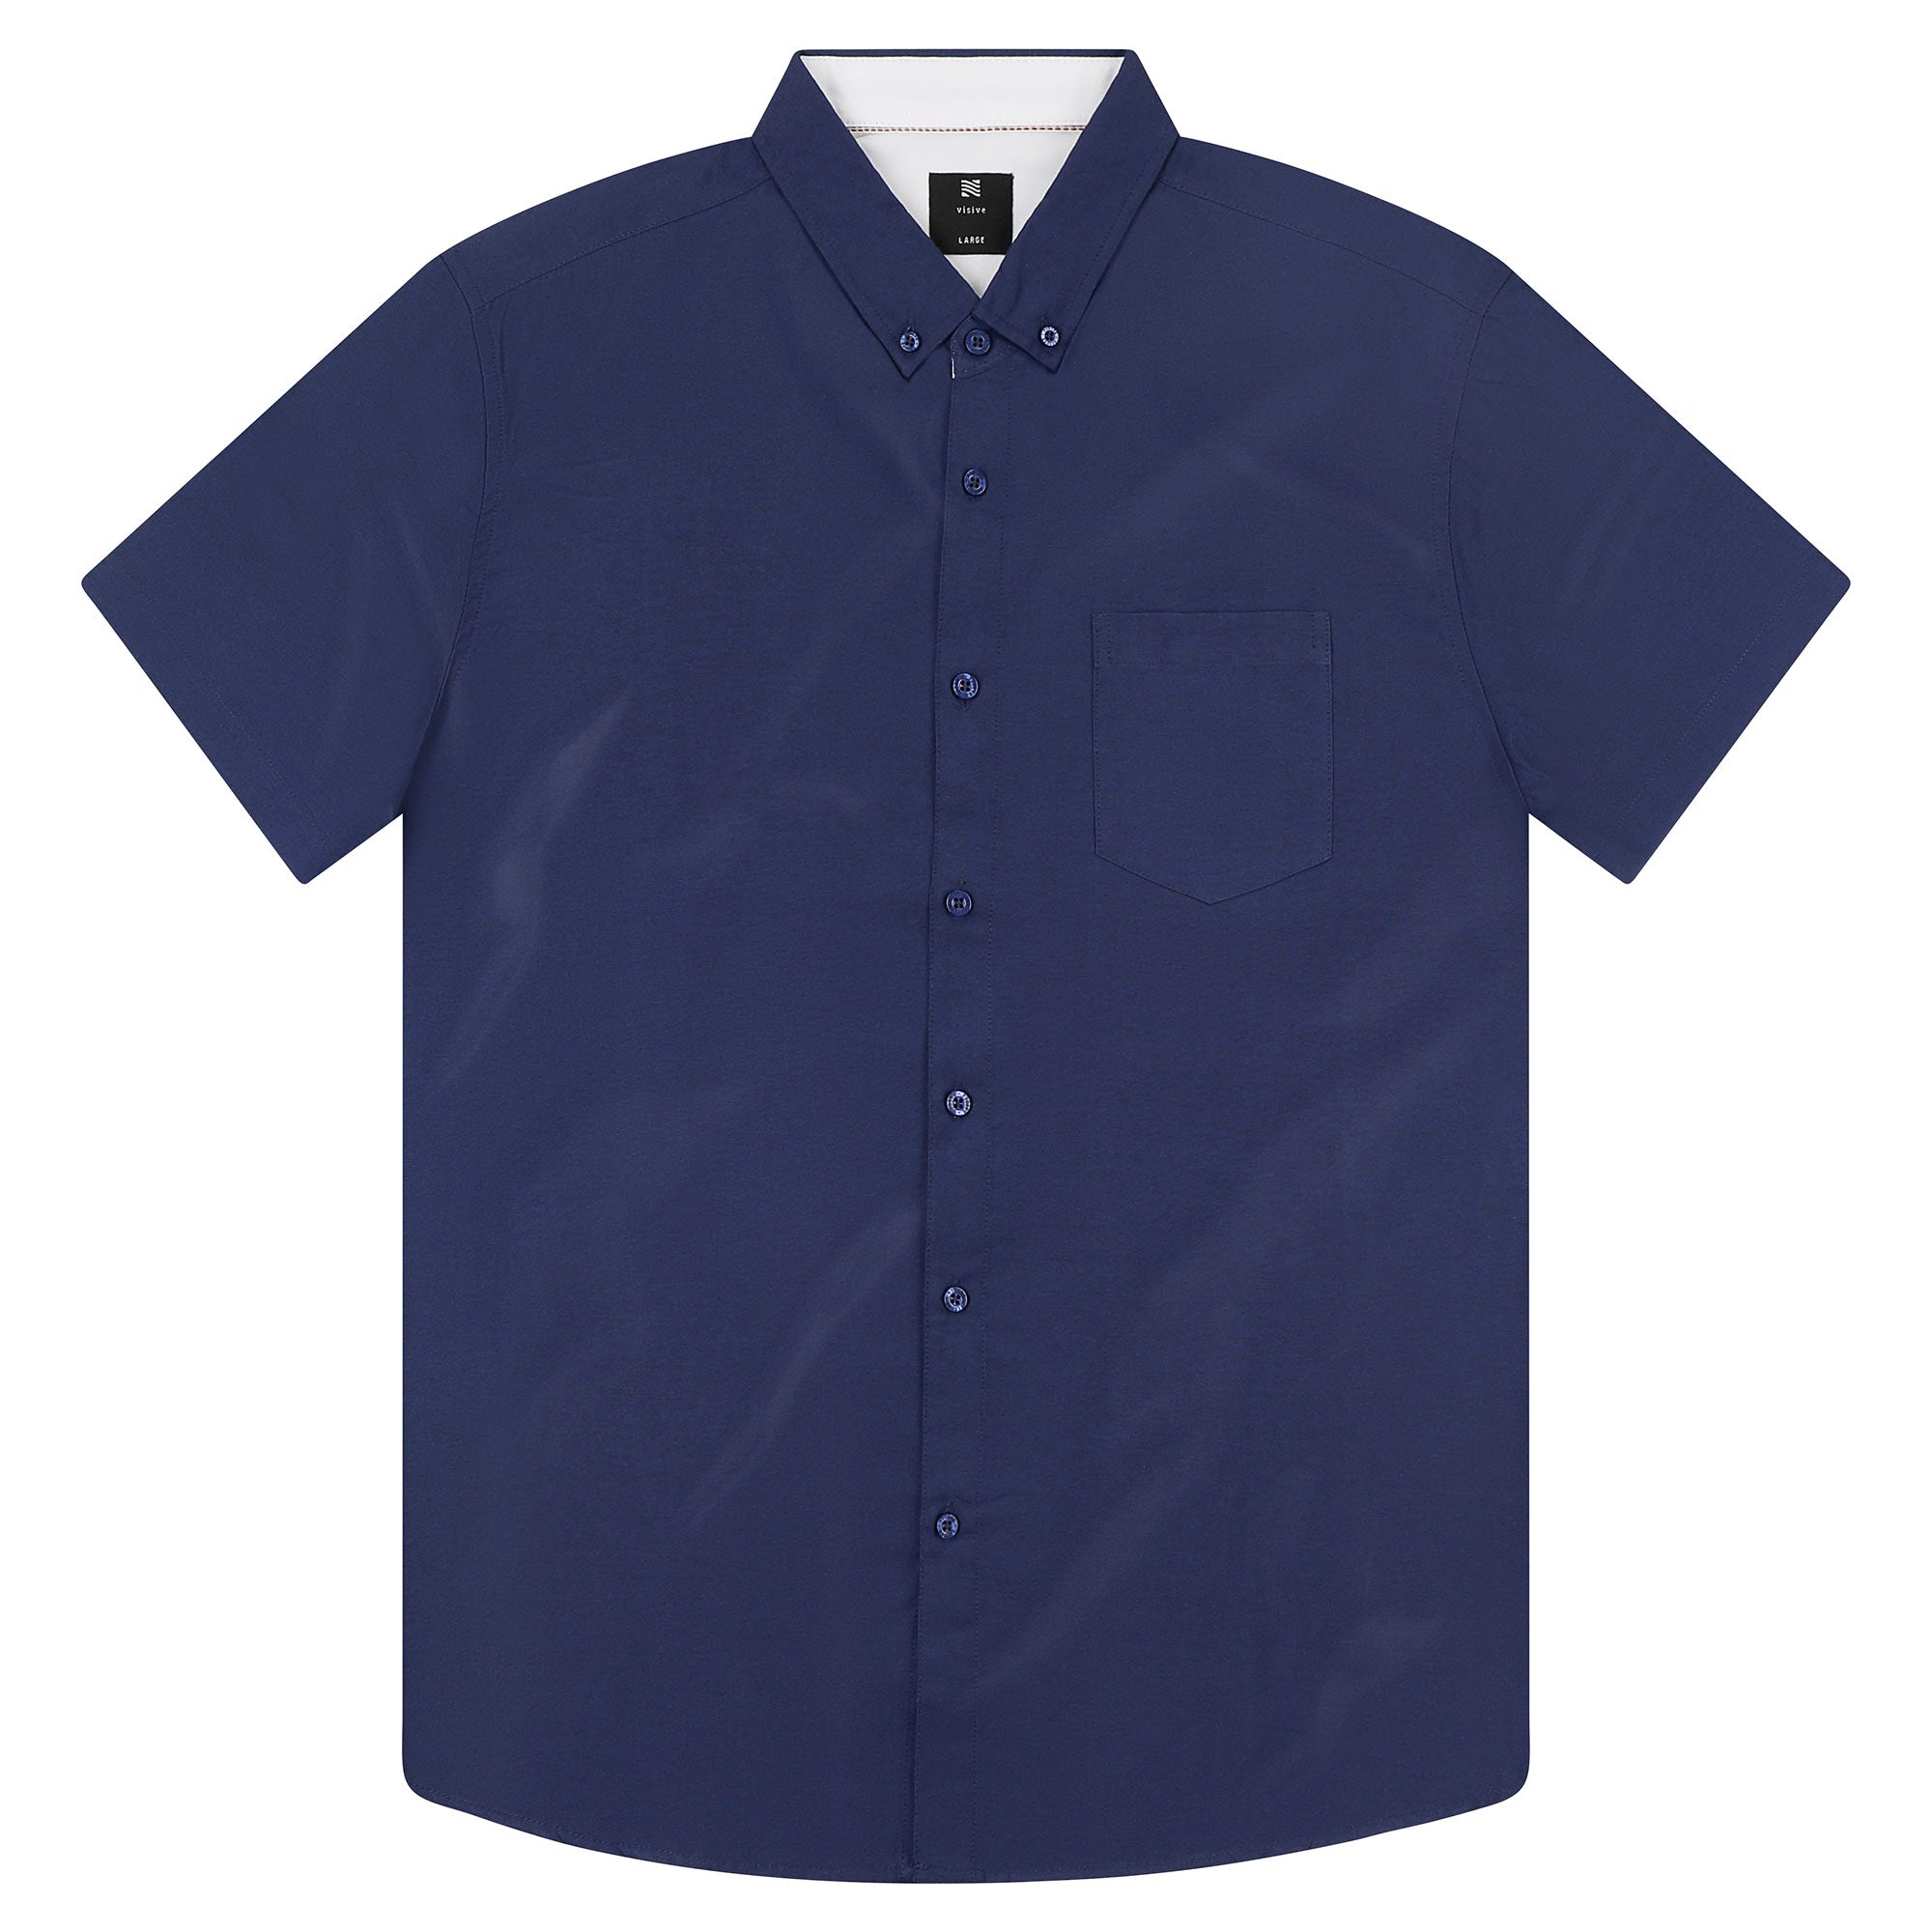 Solid Oxford - Navy